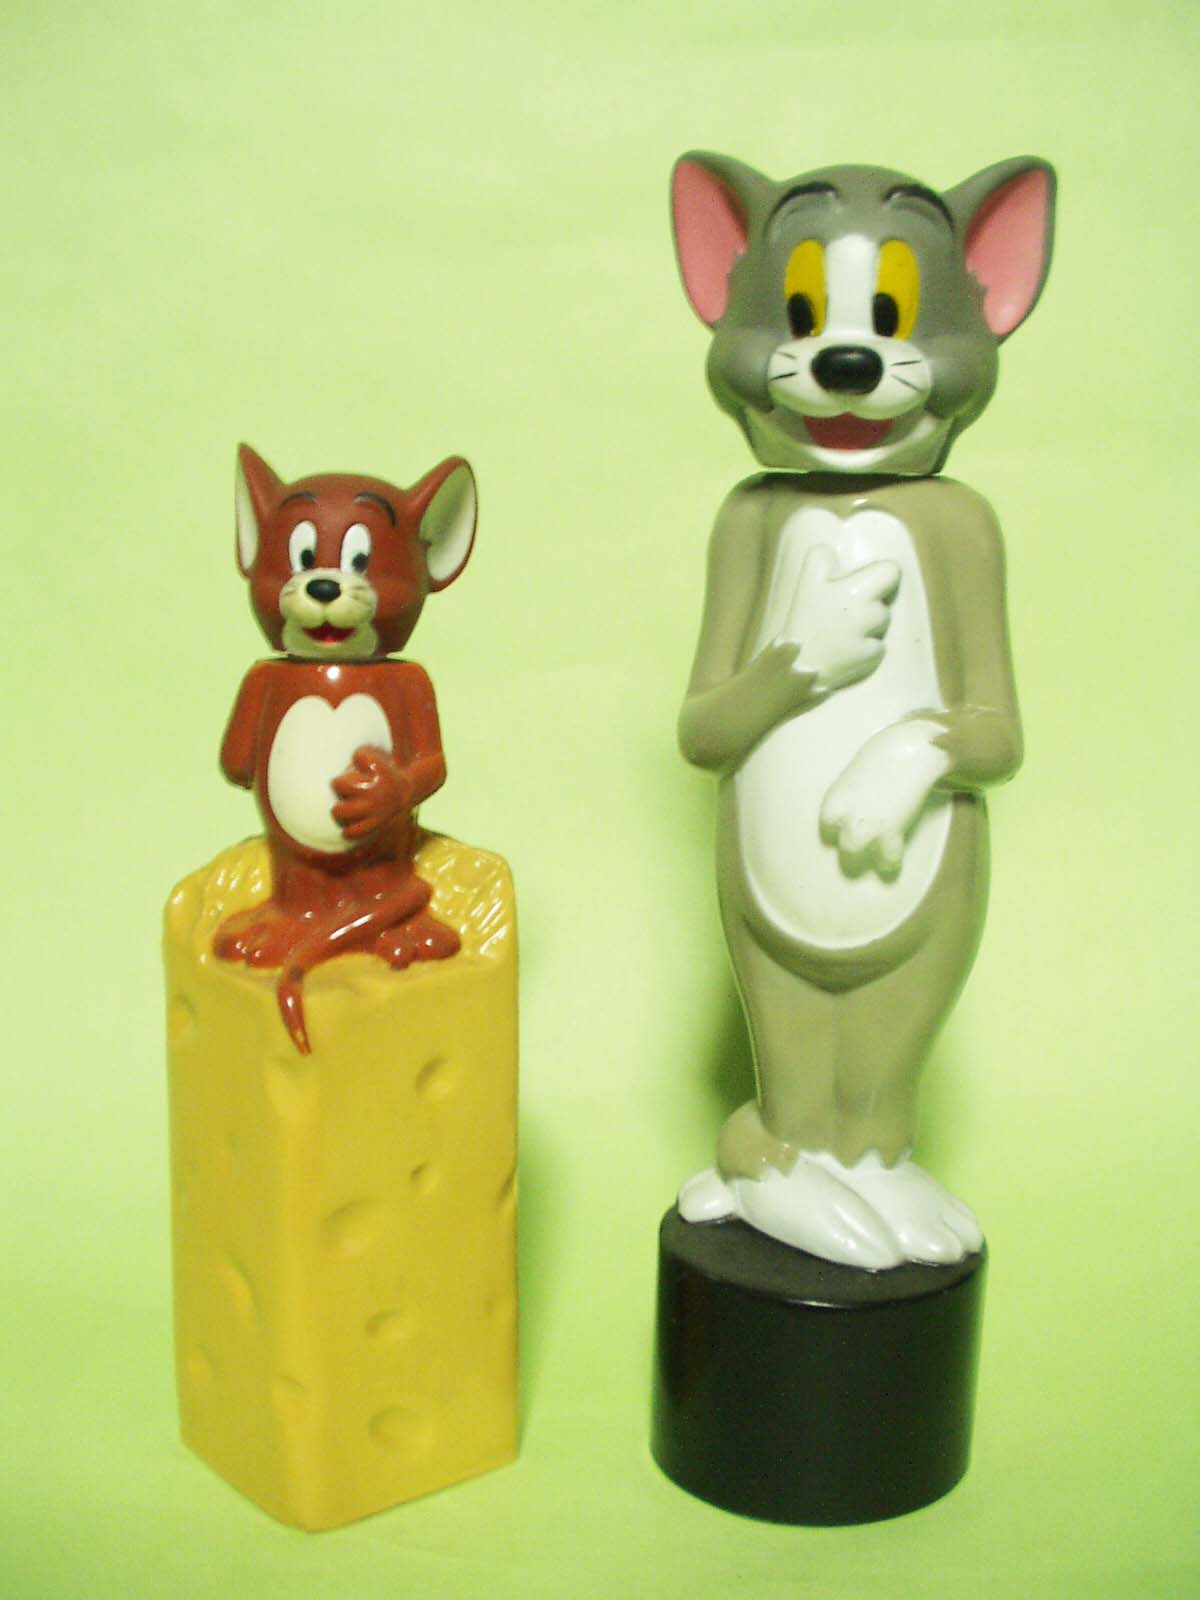 Shampoo Bottle / TOM and JERRY (1989) by Euromark